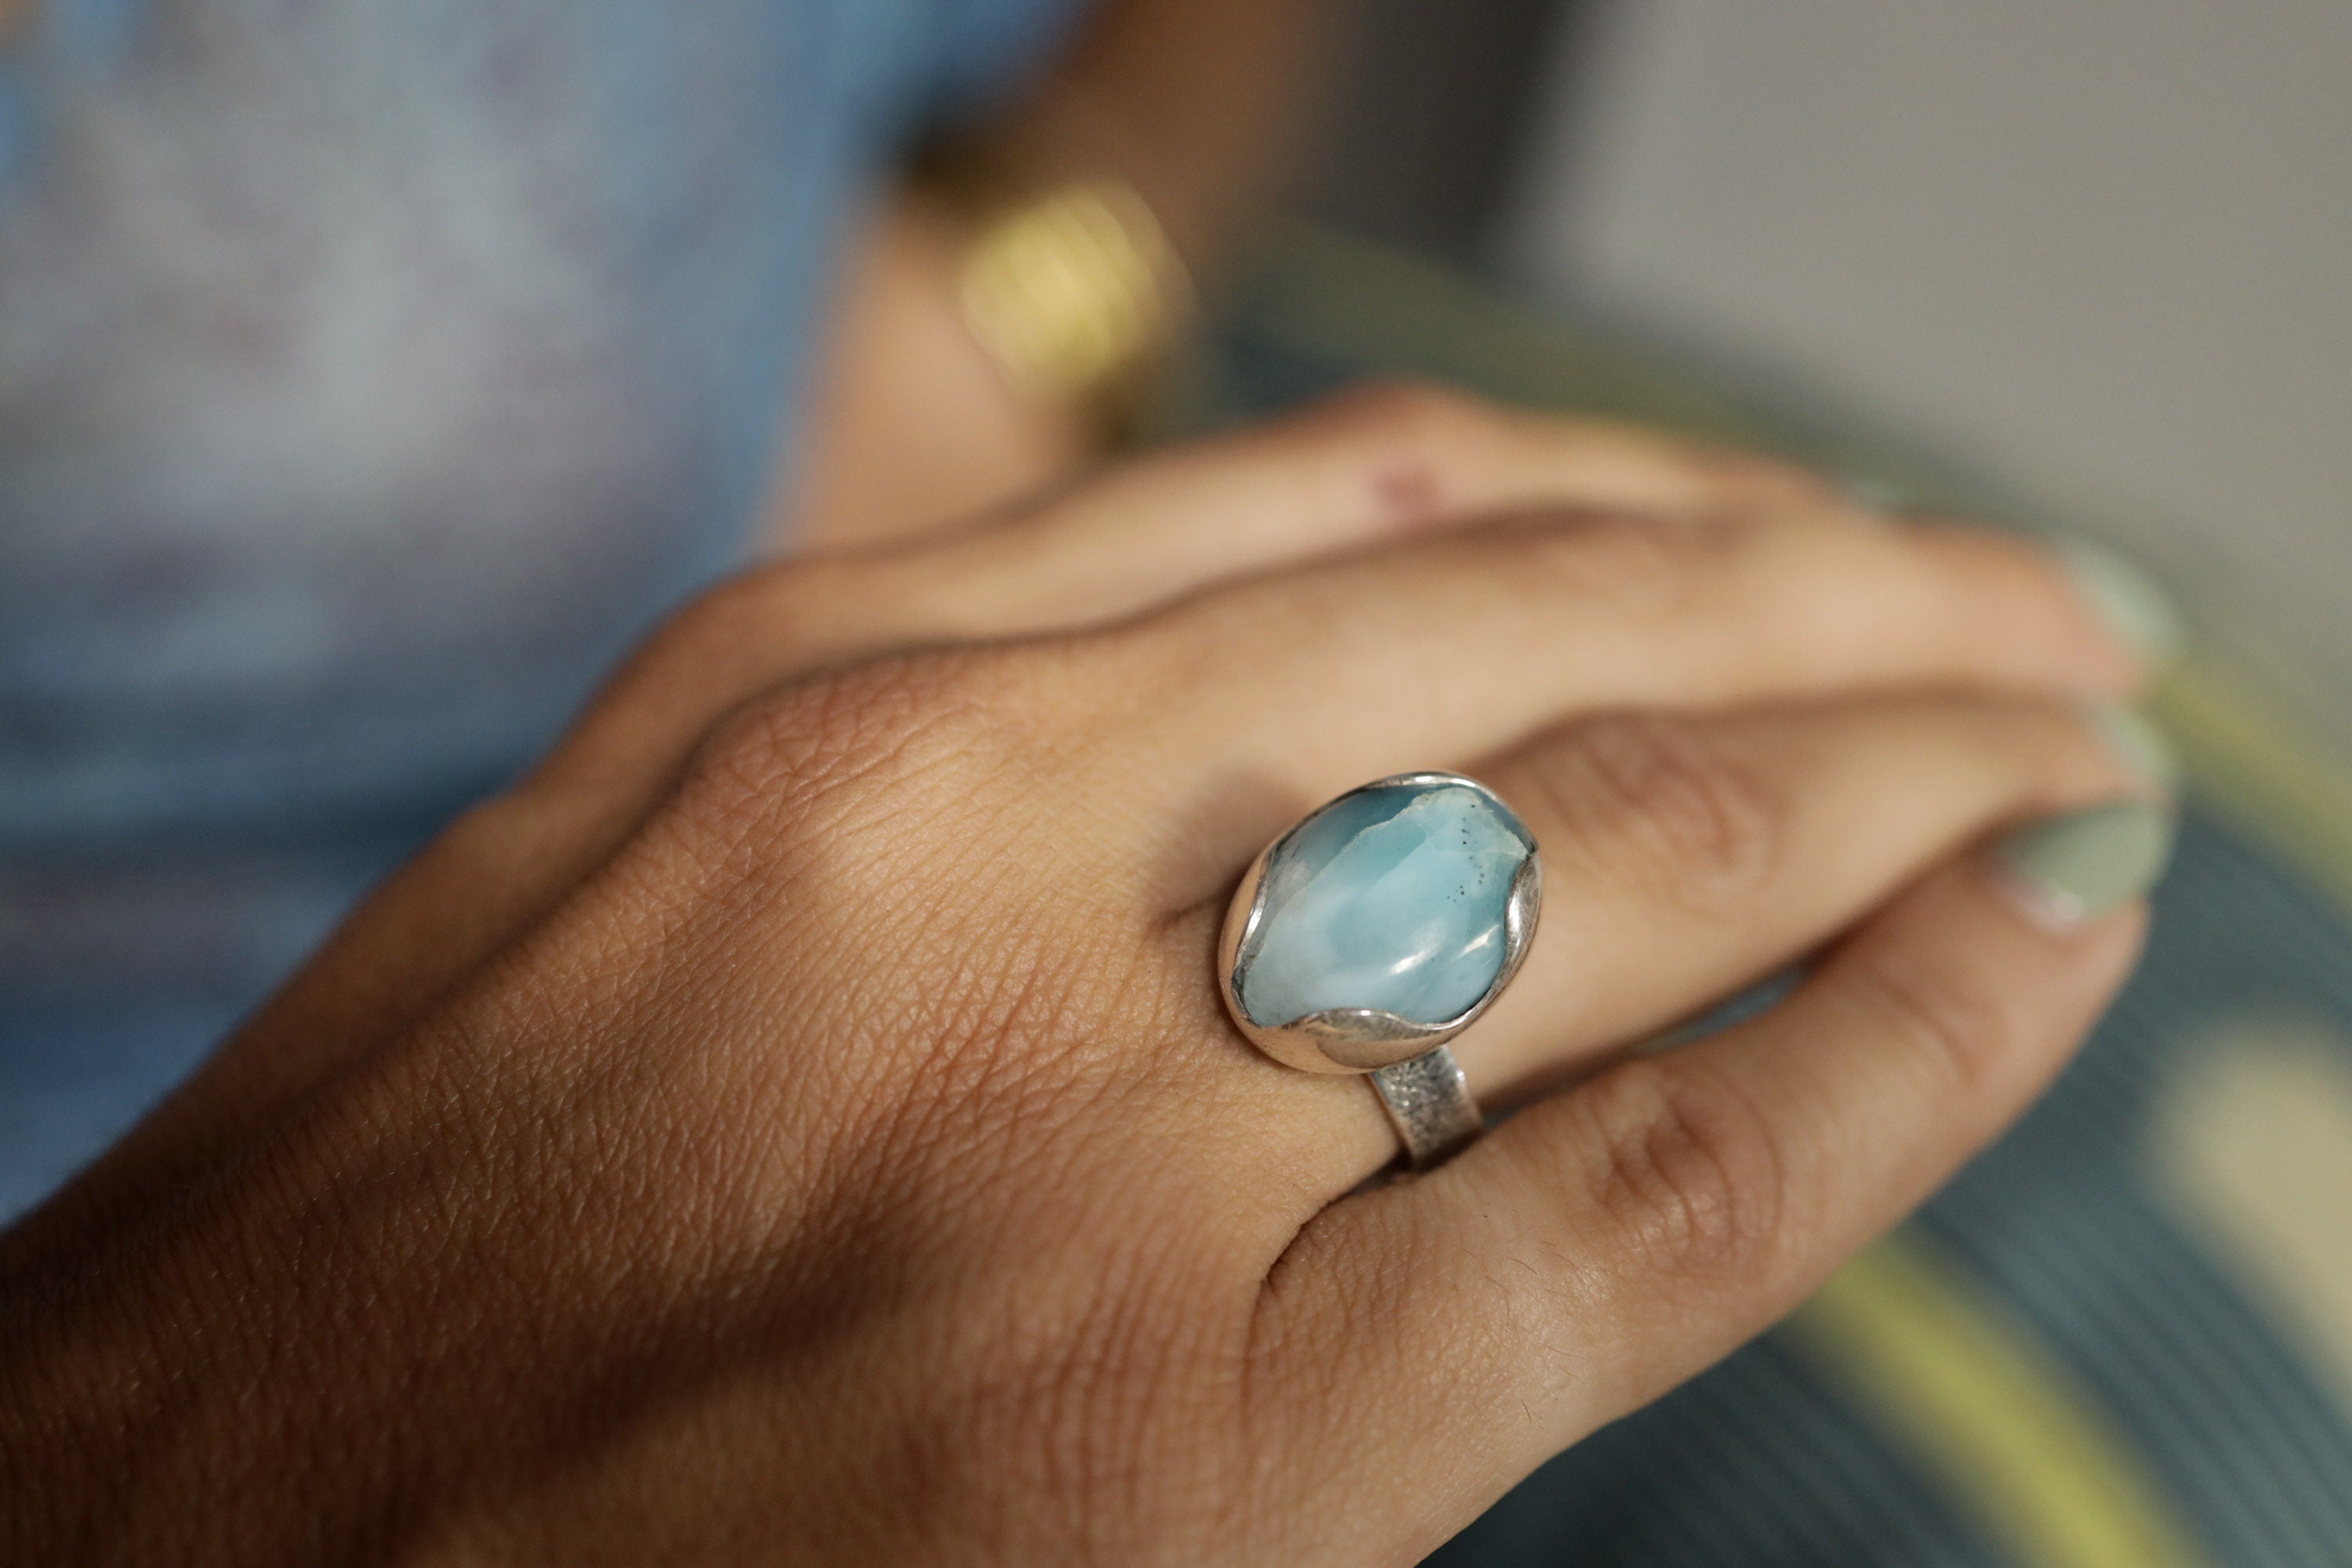 A Tribute to Oceanic Splendor: Adjustable Sterling Silver Ring with Oval Larimar - Unisex - Size 5-12 US - NO/02